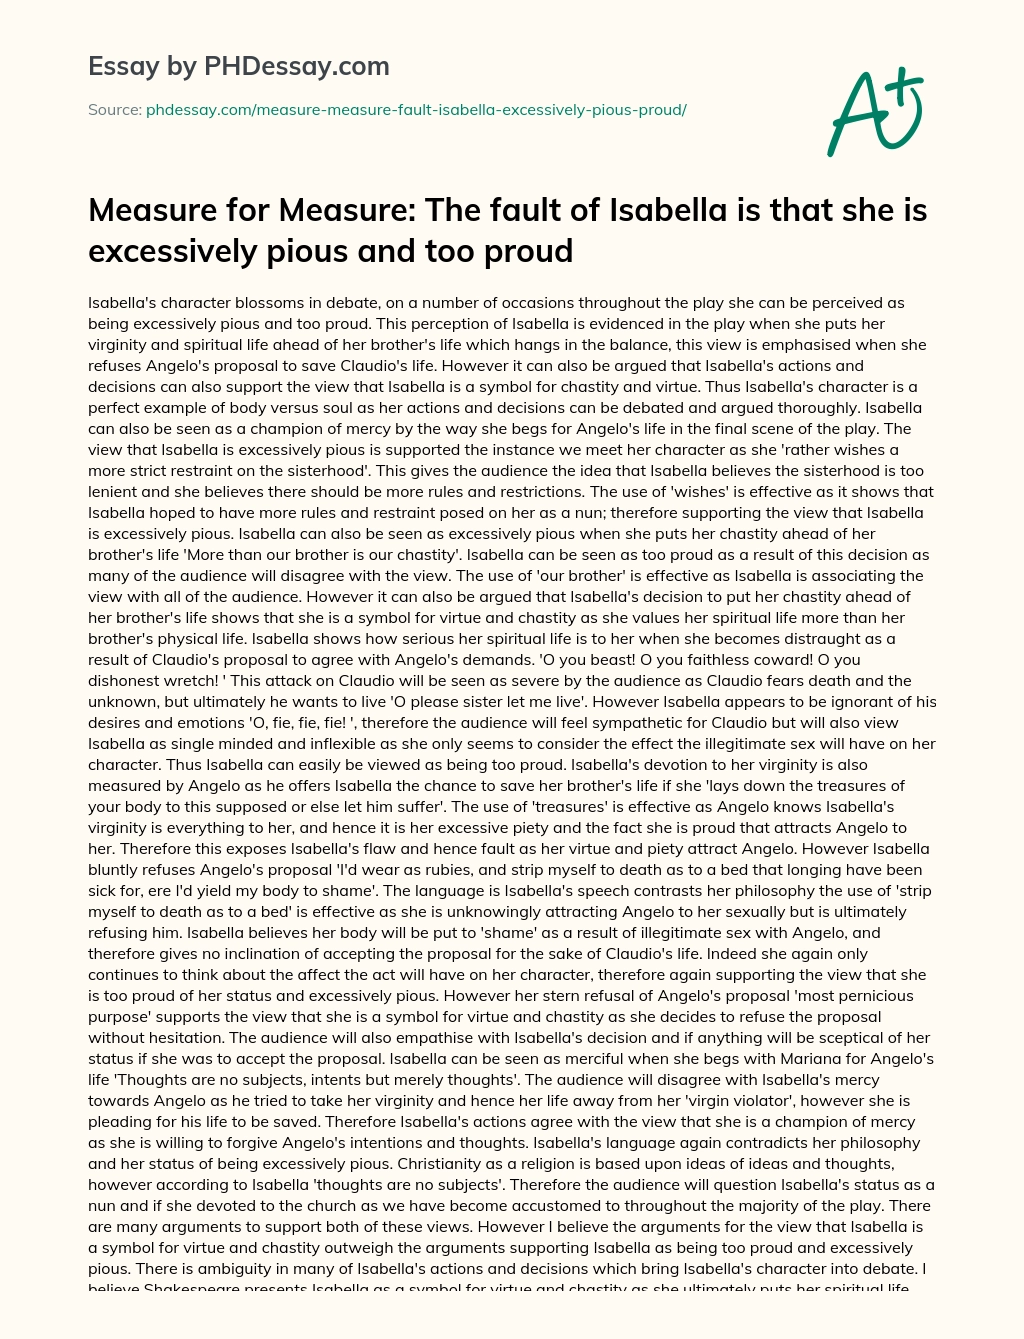 Measure for Measure: The fault of Isabella is that she is excessively pious and too proud essay